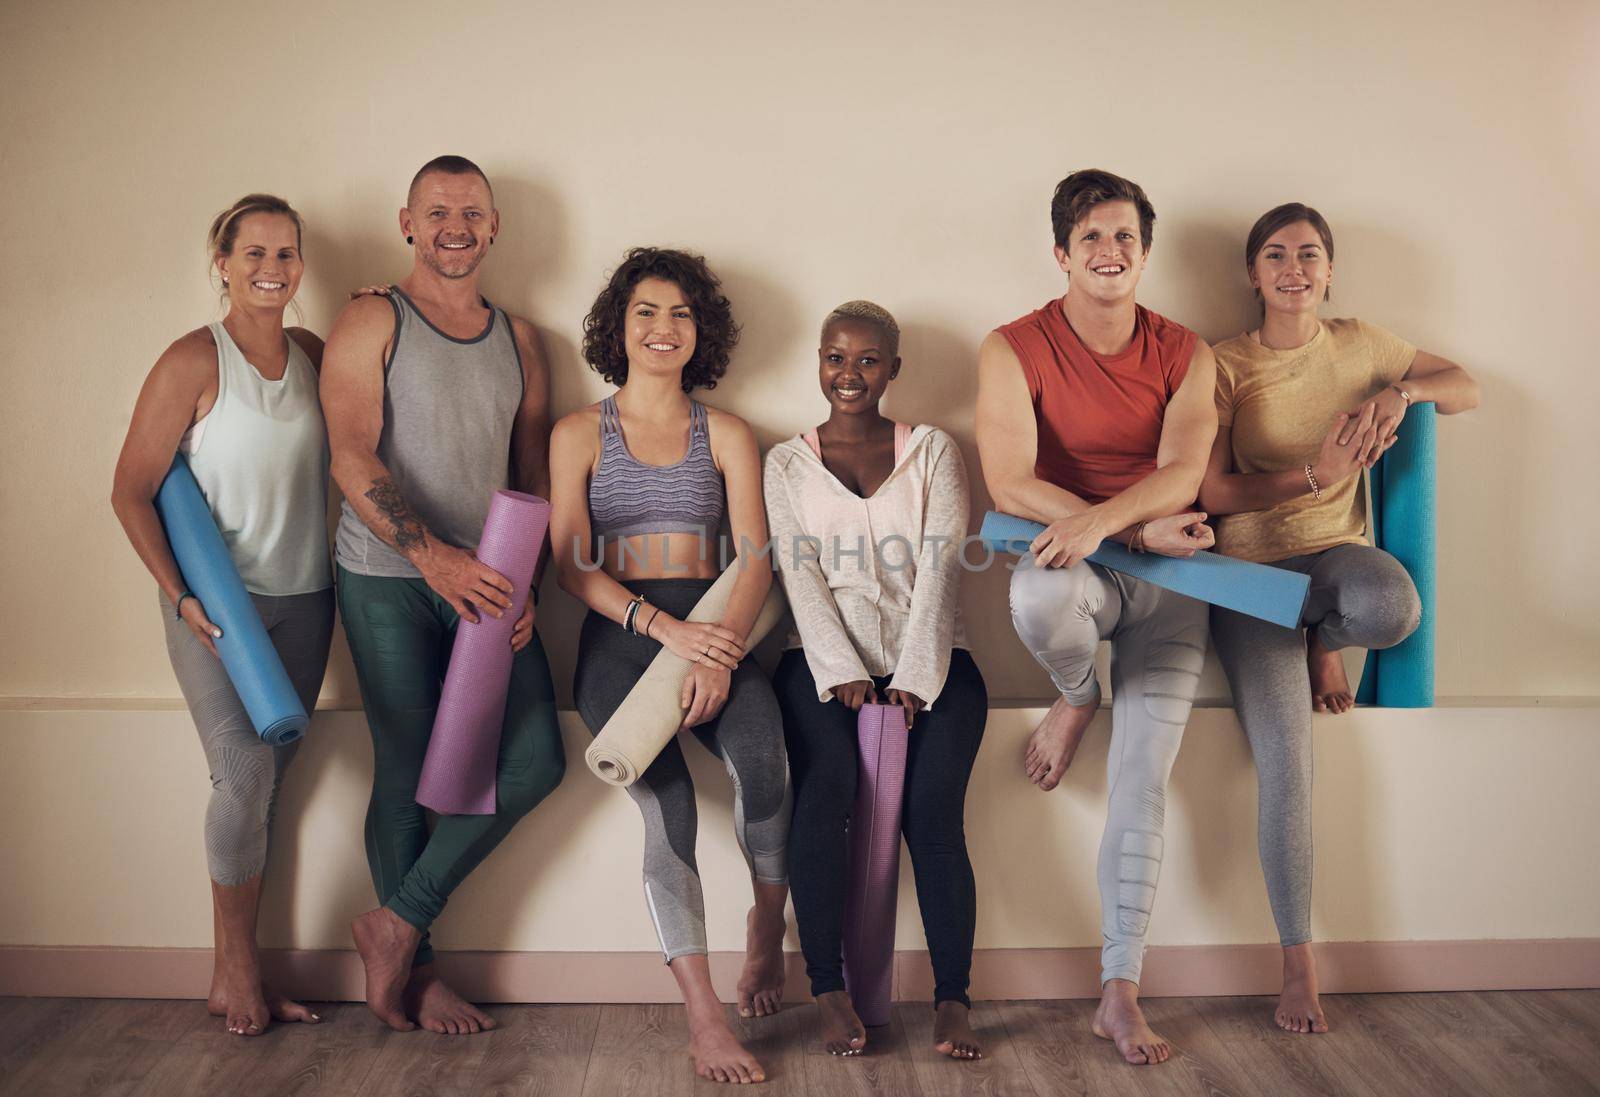 This is the best yoga group. Full length portrait of a diverse group of yogis sitting together and bonding after an indoor yoga session. by YuriArcurs